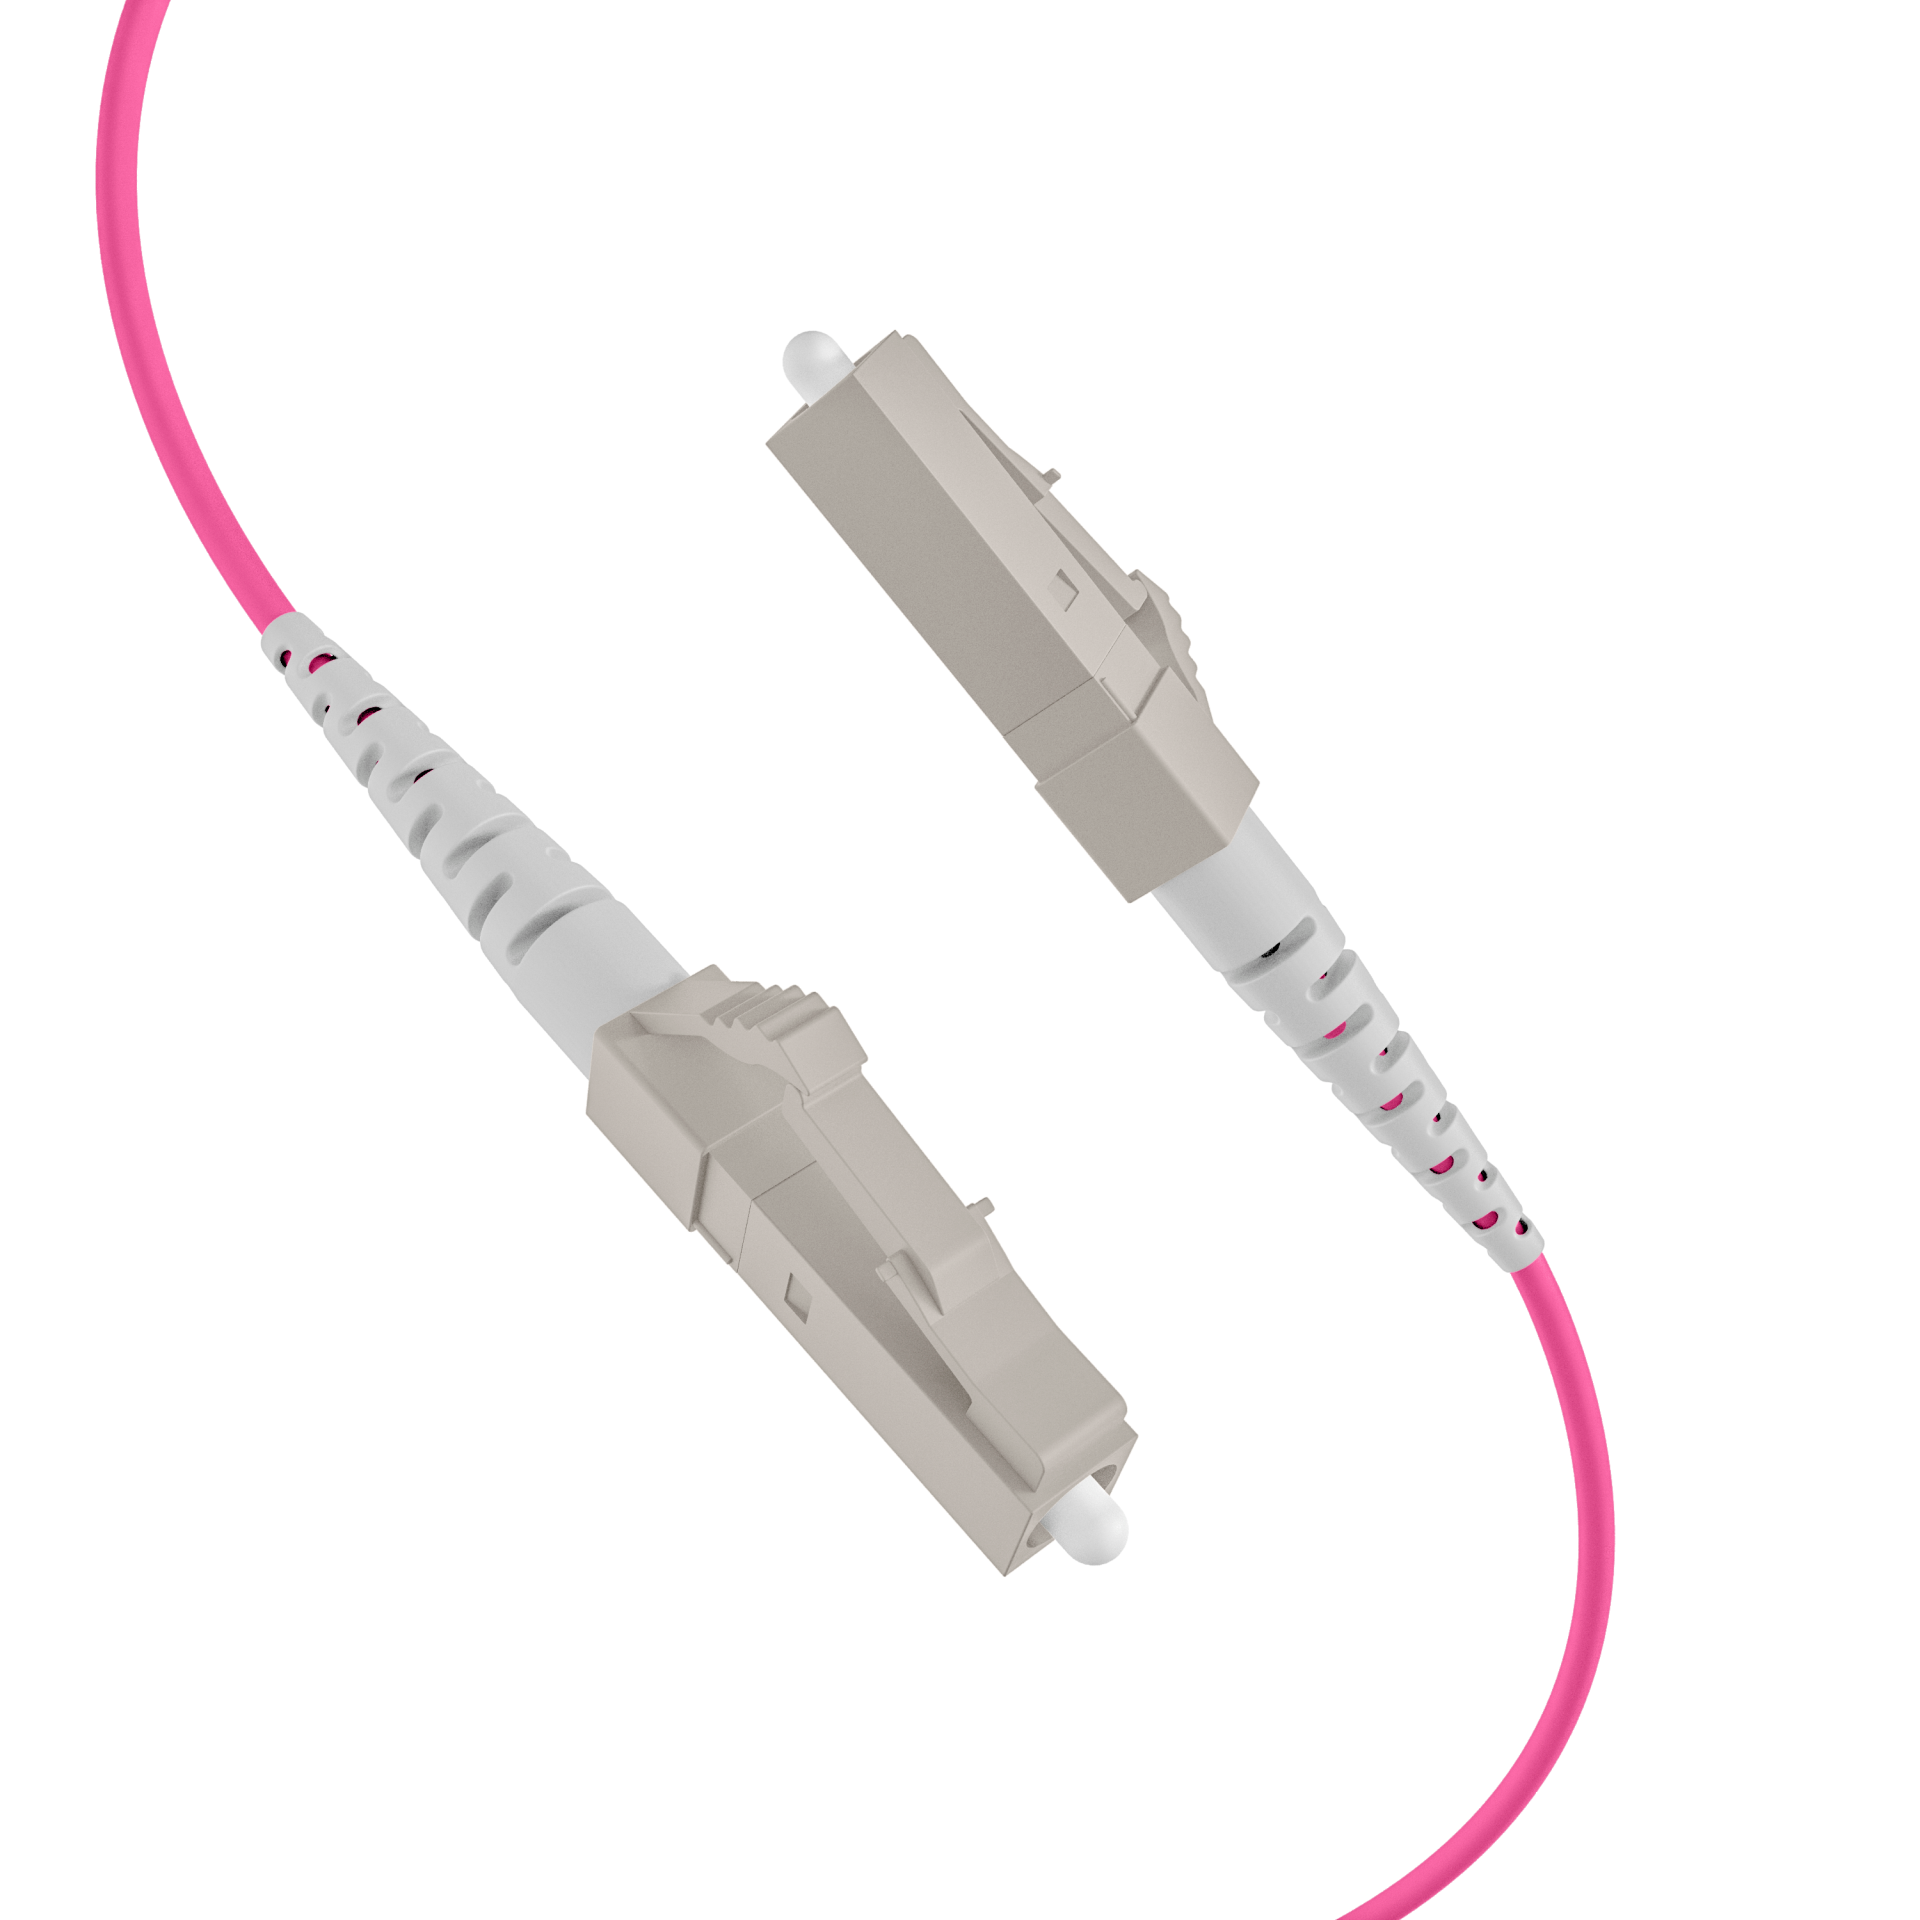 Trunkcable U-DQ(ZN)BH OM4 12G (1x12) LC-LC,120m Dca LSZH